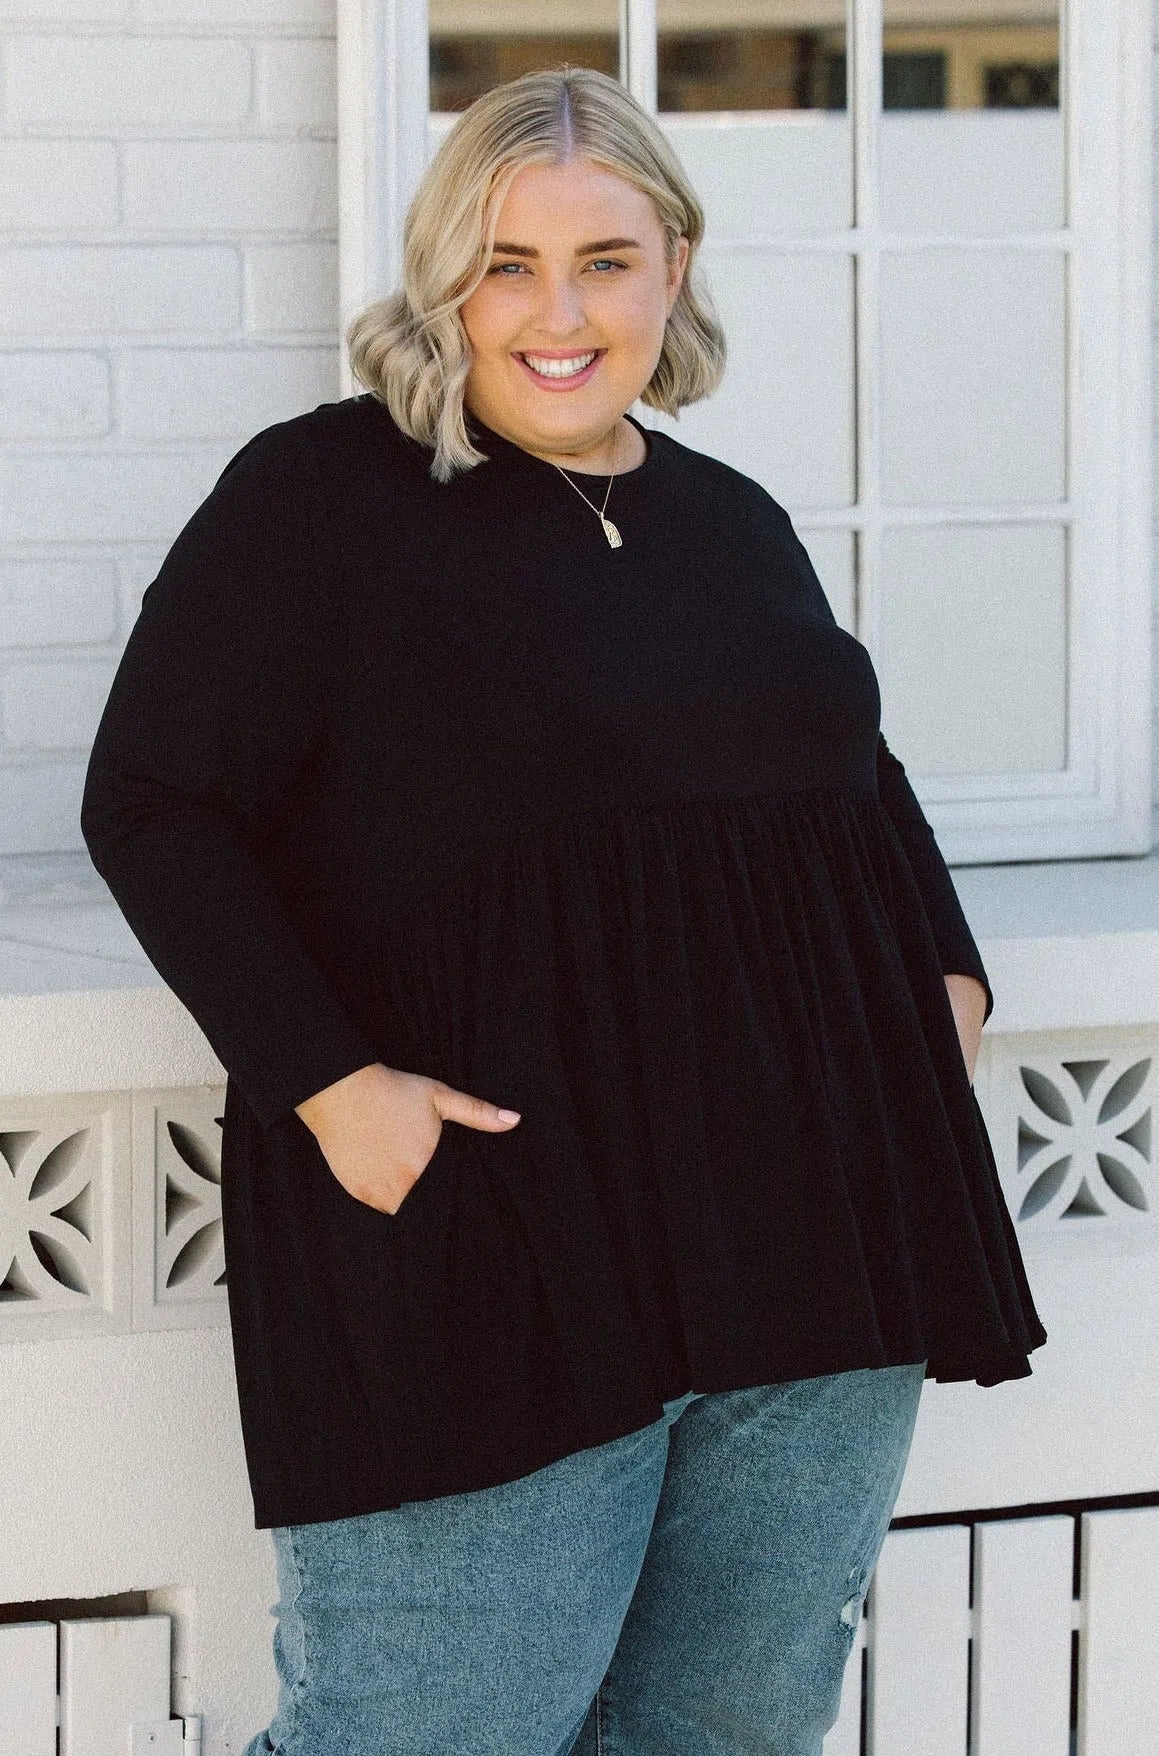 Plus Size clothing,  women modeling a Black Plus Size Long Sleeve Top - Elevate Your Style with Lucy Long Sleeve Top